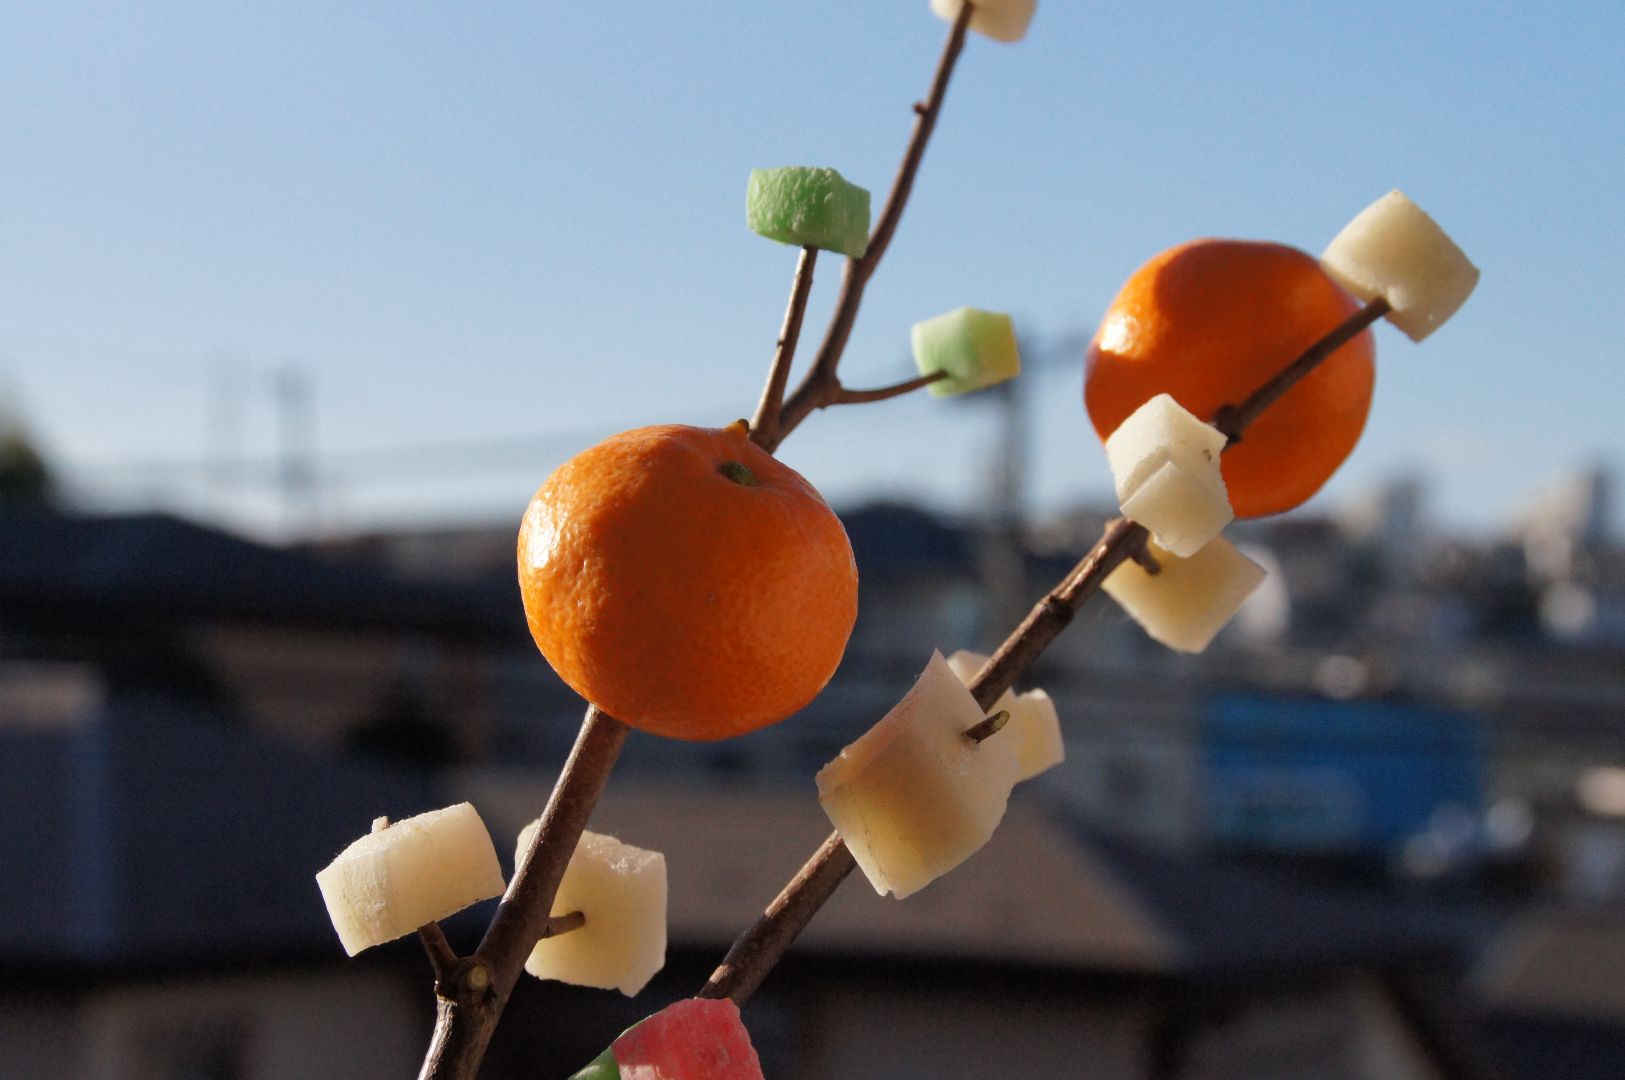 chunks of mochi and two citrus fruits on sticks